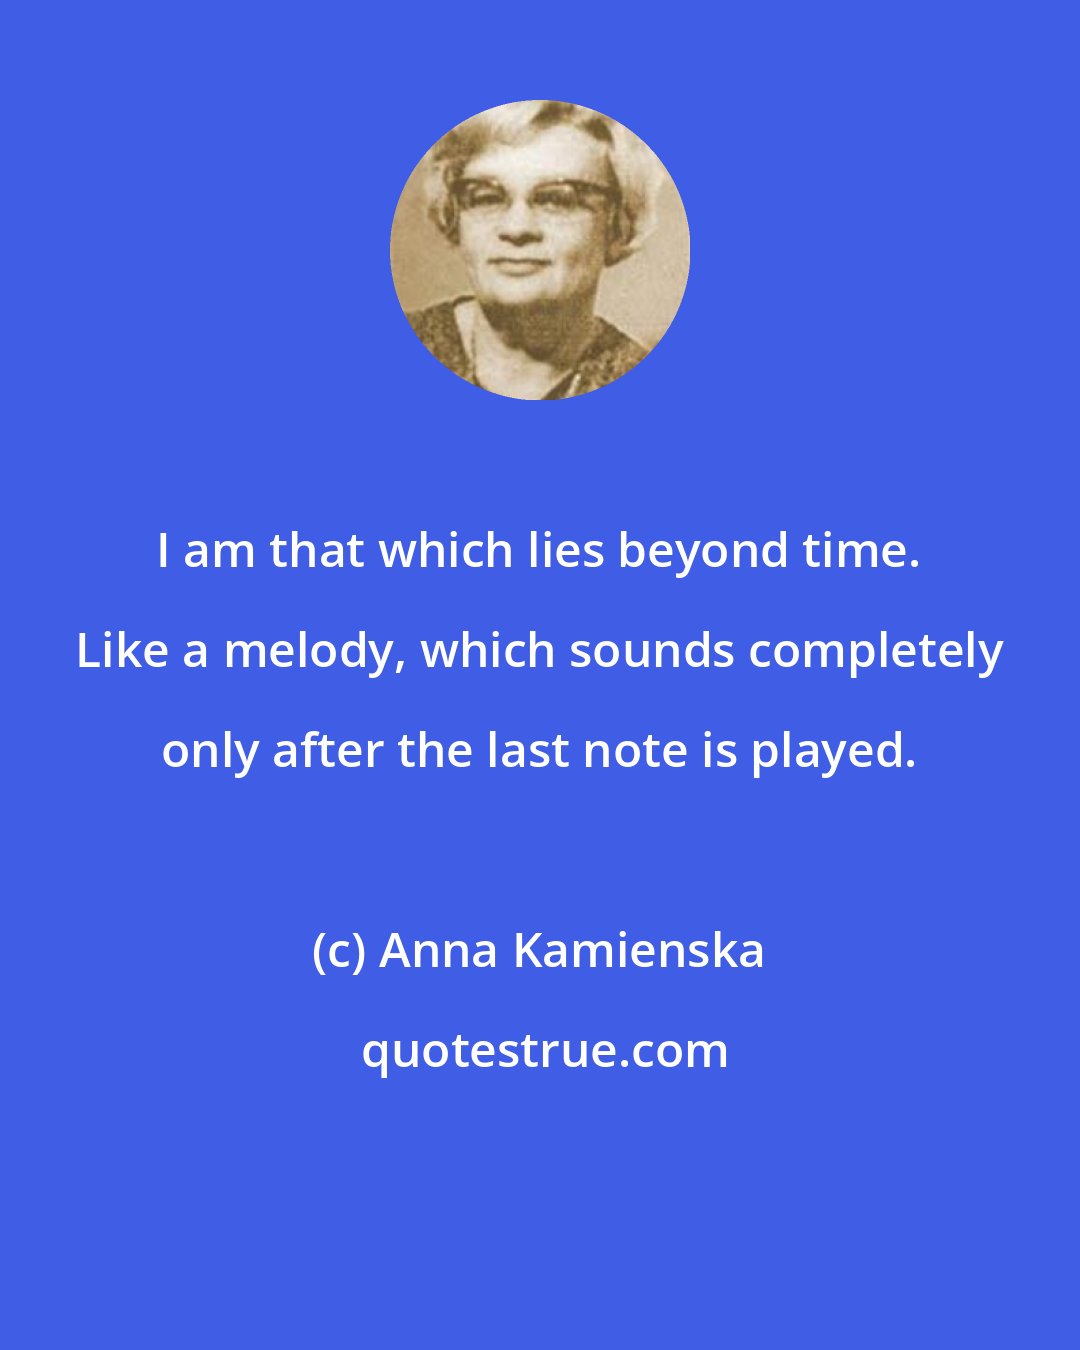 Anna Kamienska: I am that which lies beyond time. Like a melody, which sounds completely only after the last note is played.